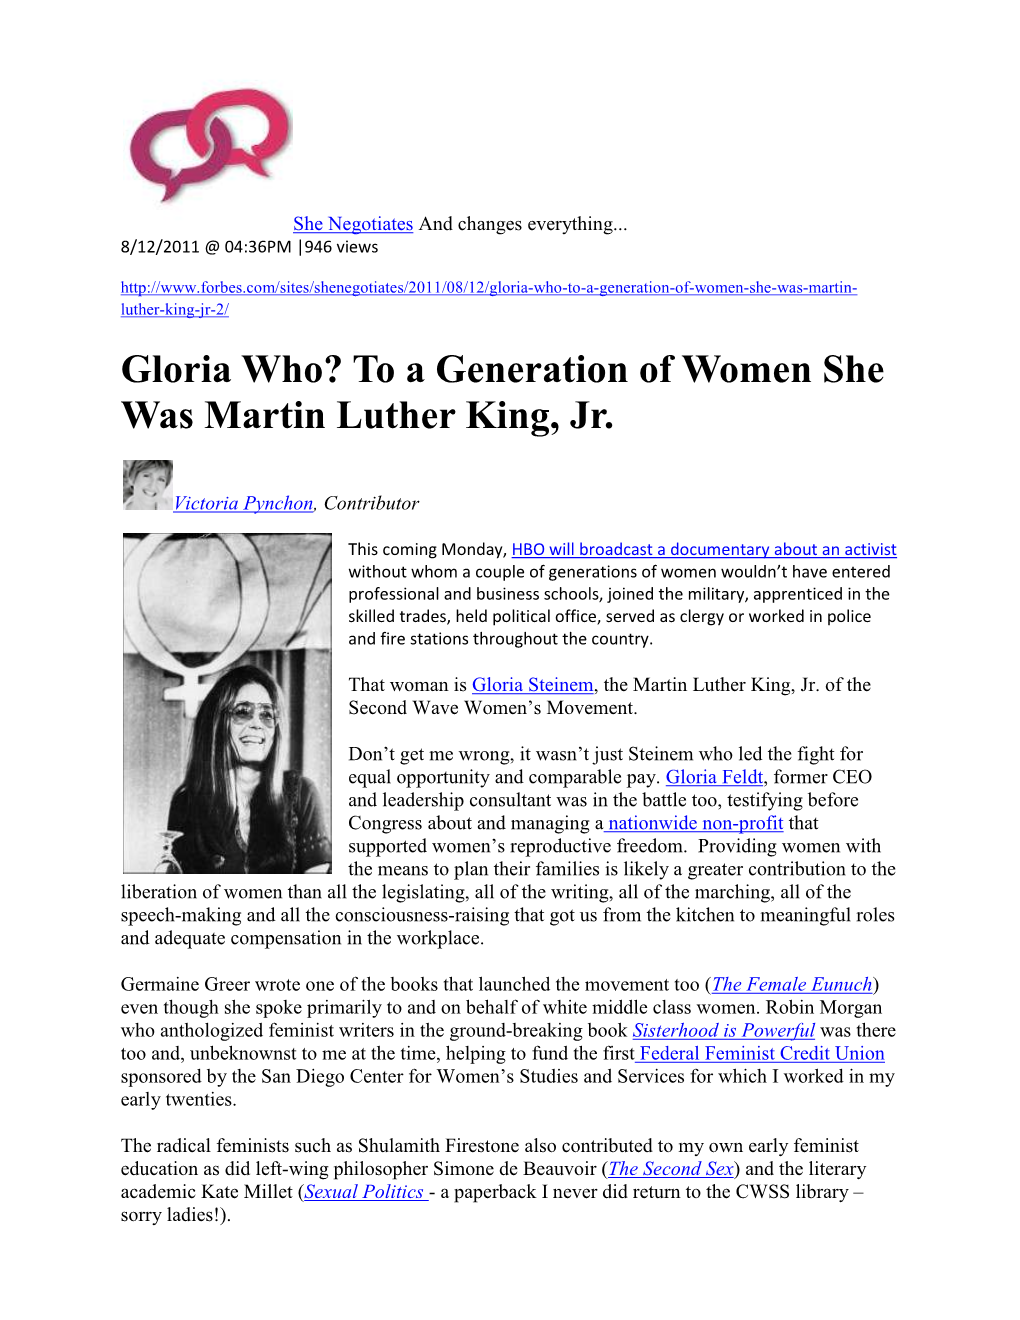 Gloria Who? to a Generation of Women She Was Martin Luther King, Jr